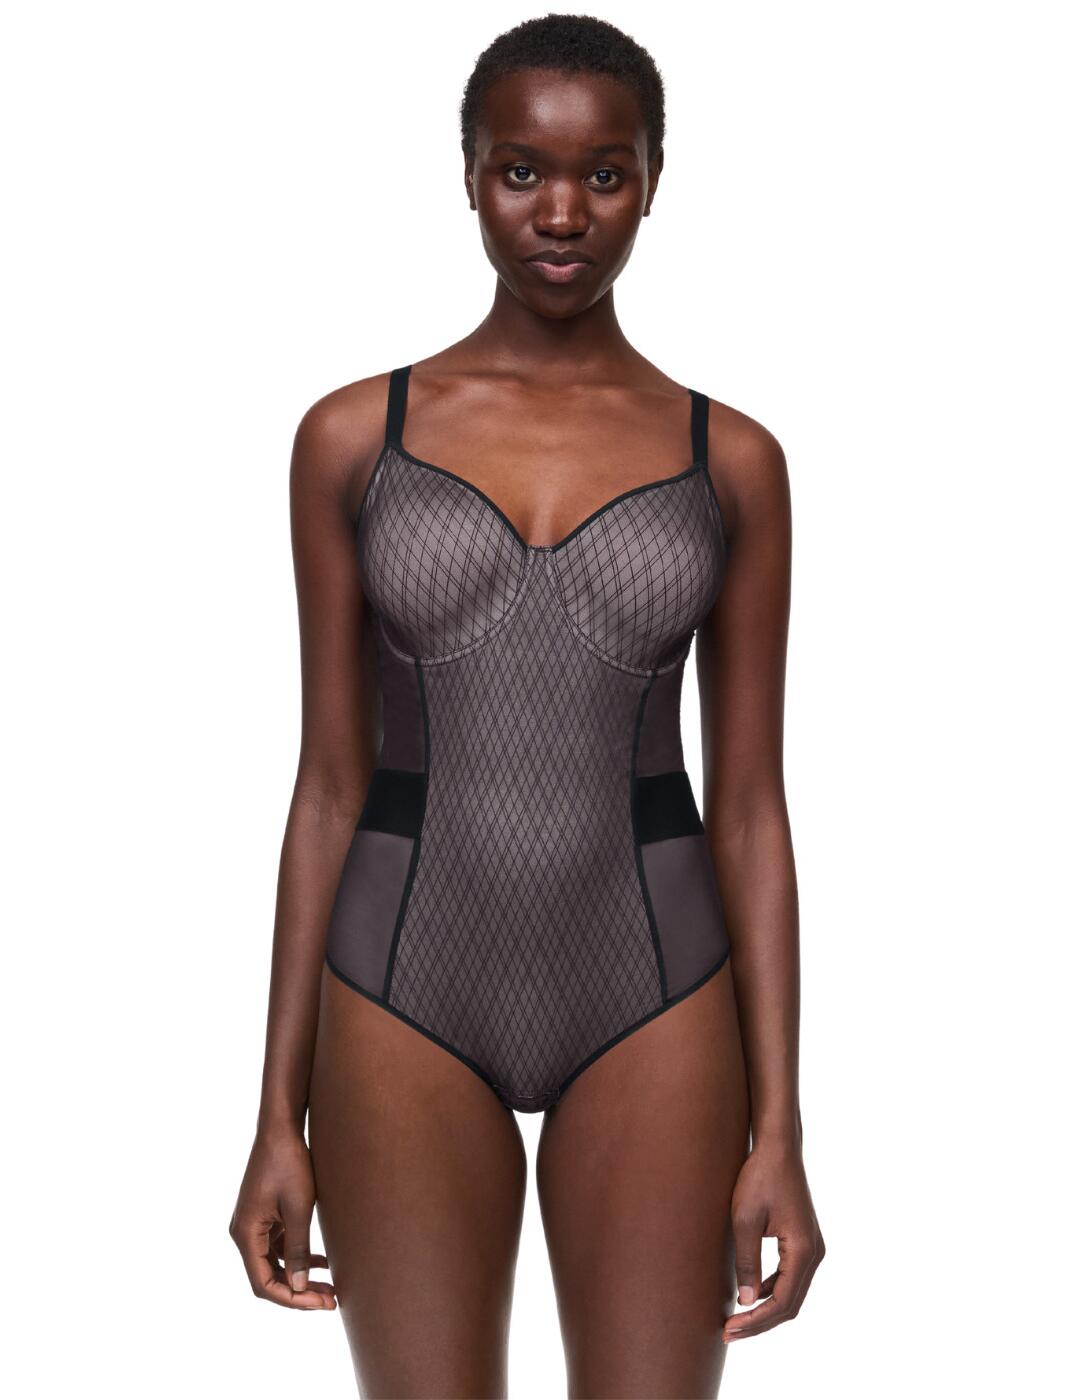 Buy Smooth Bodysuit, Fast Delivery